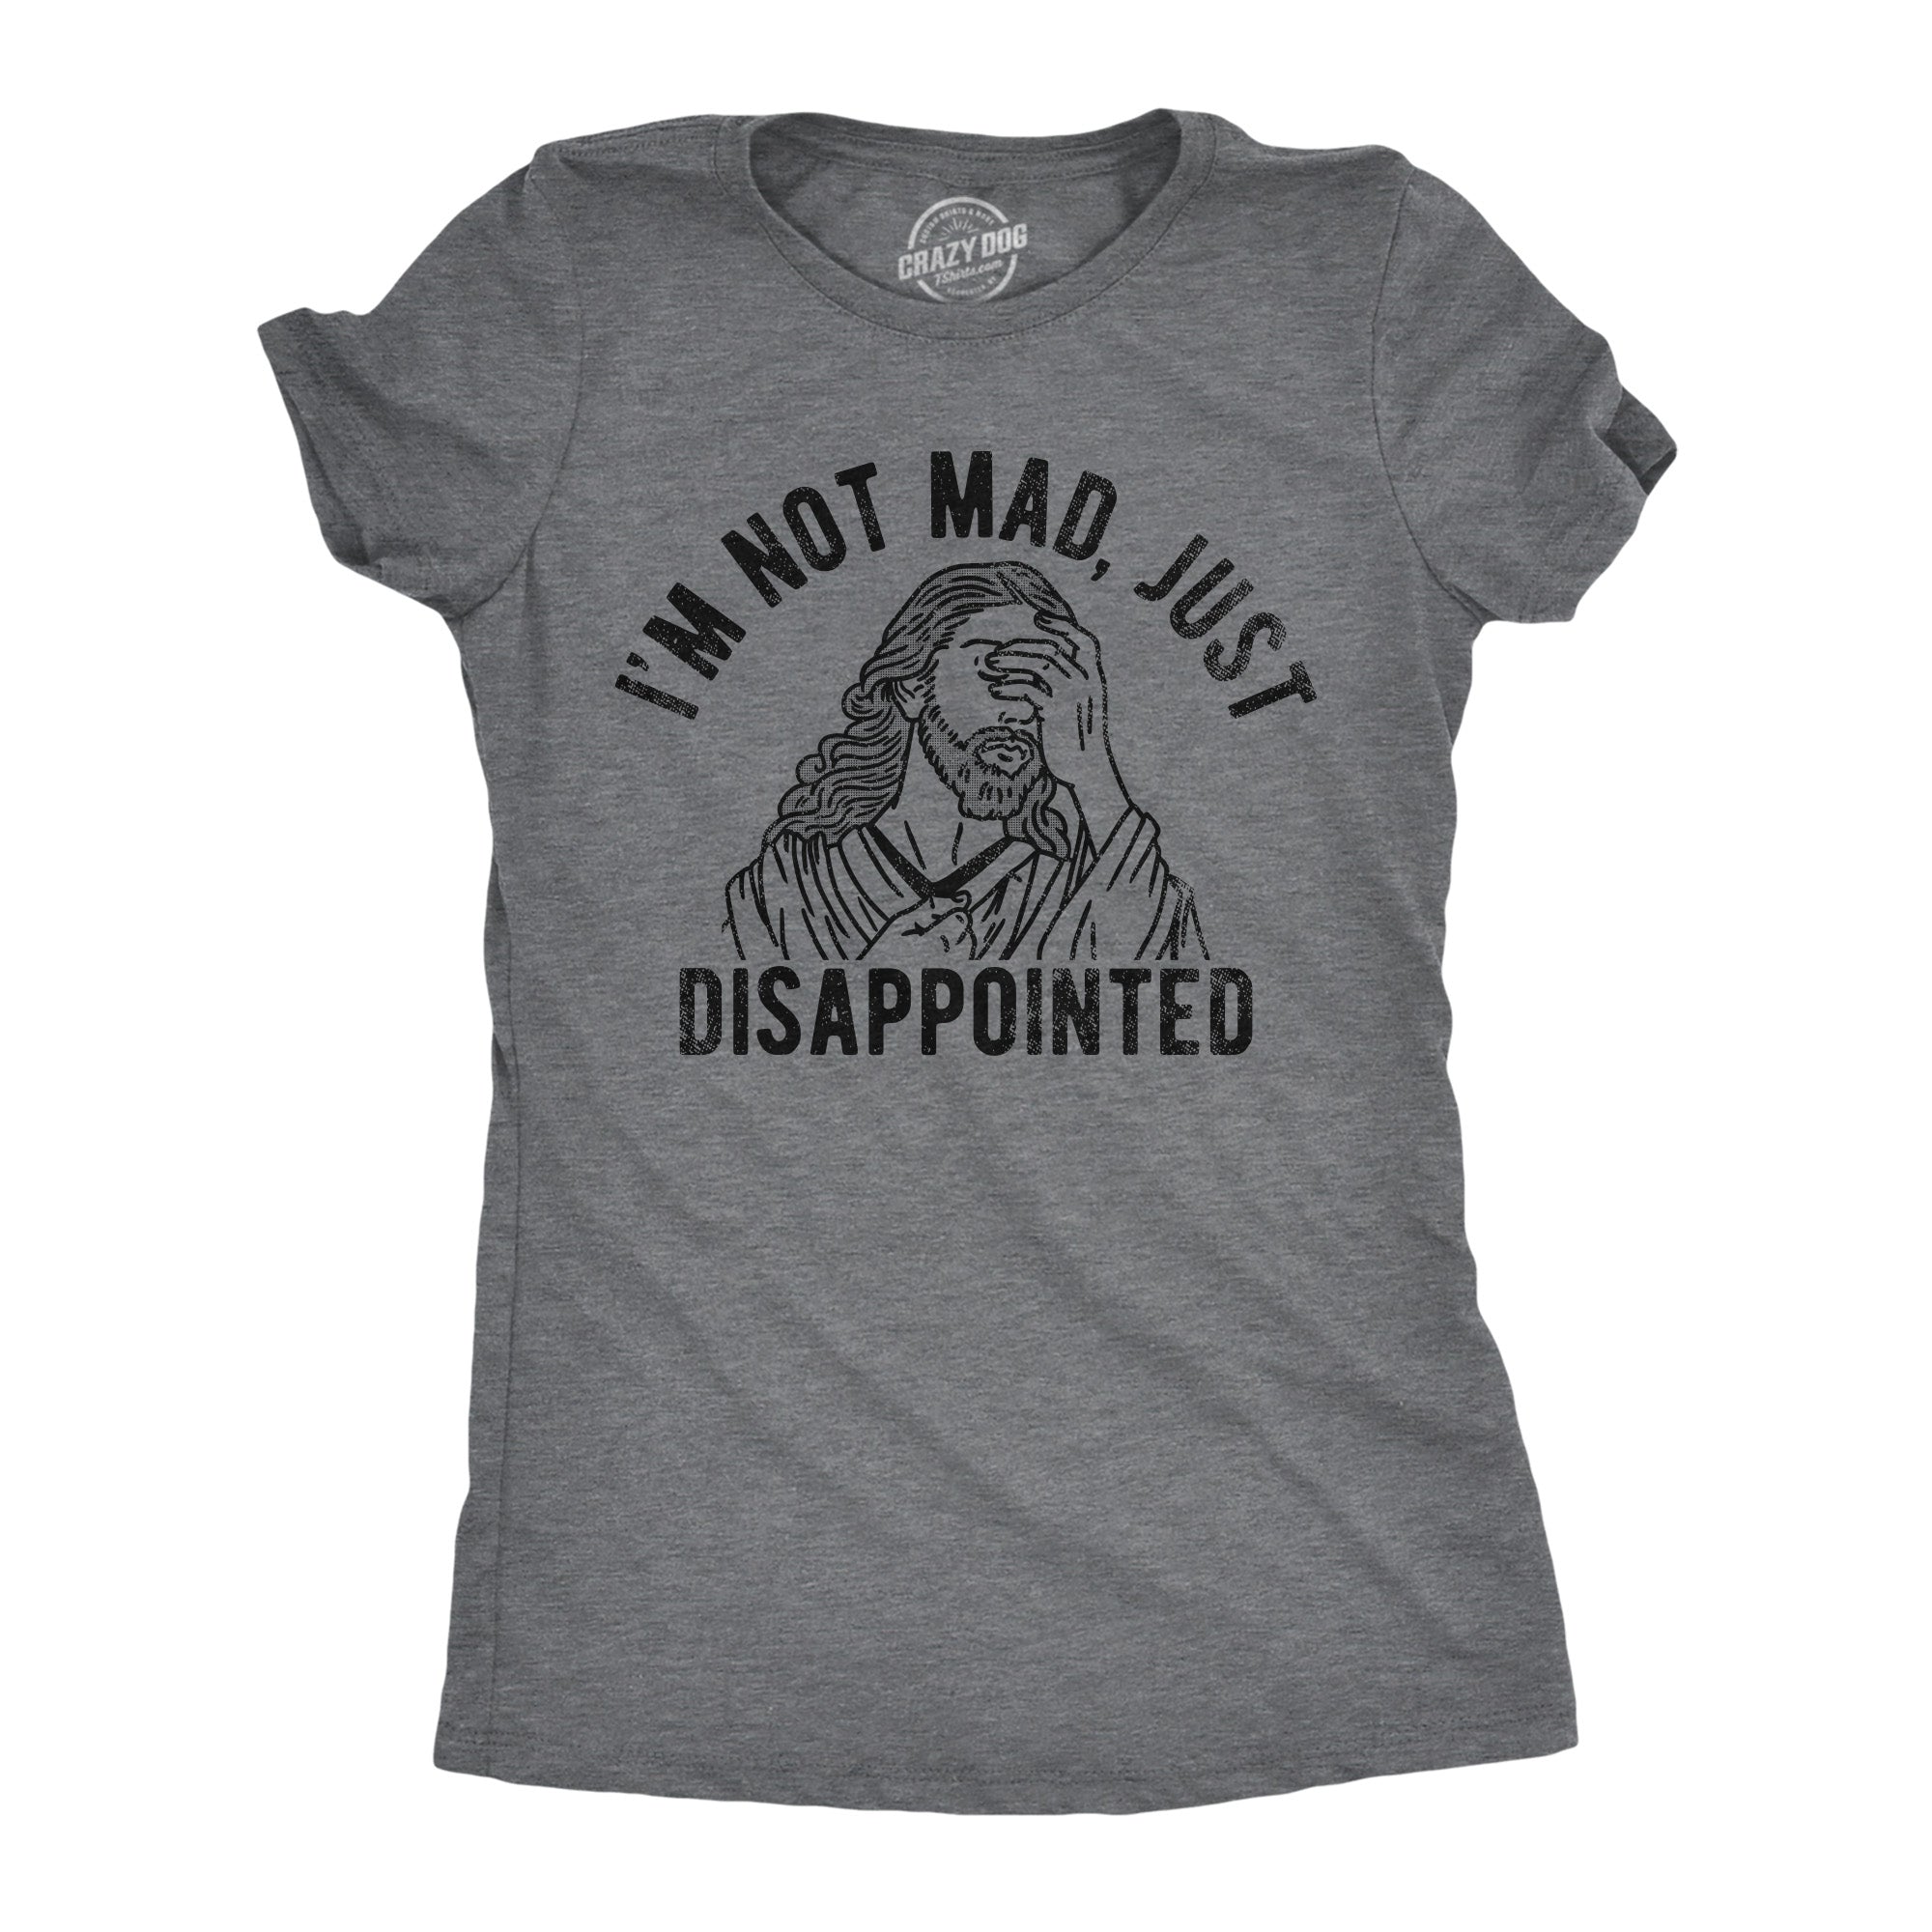 Funny Dark Heather Grey - Not Mad Jesus Im Not Mad Just Disappointed Womens T Shirt Nerdy sarcastic Religion Tee